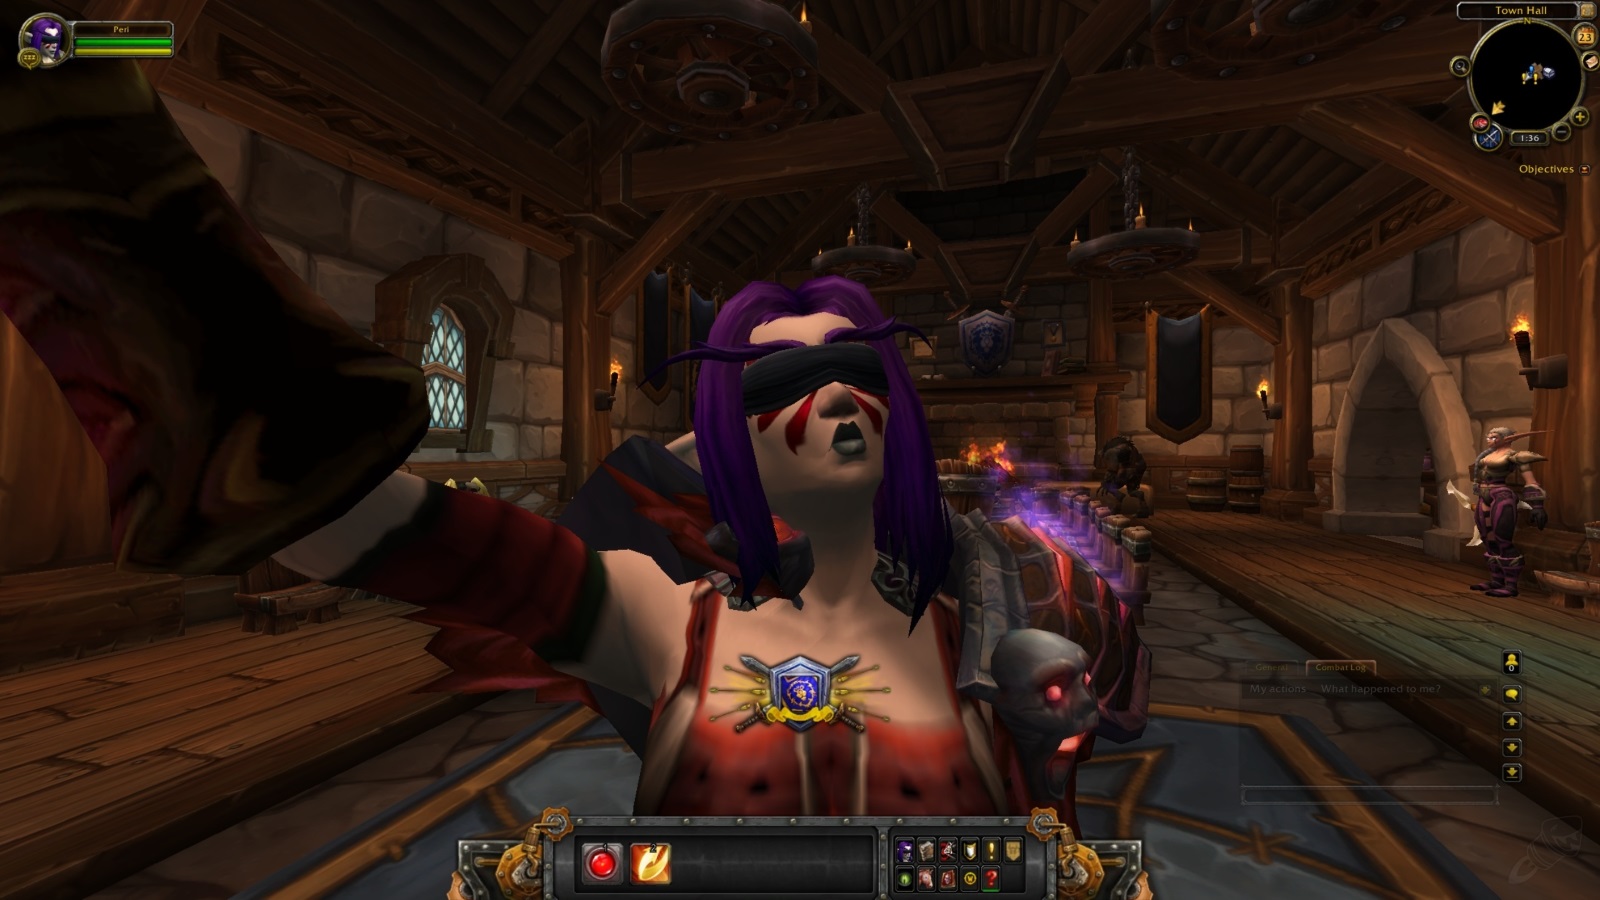 The Selfie Comes To World of Warcraft